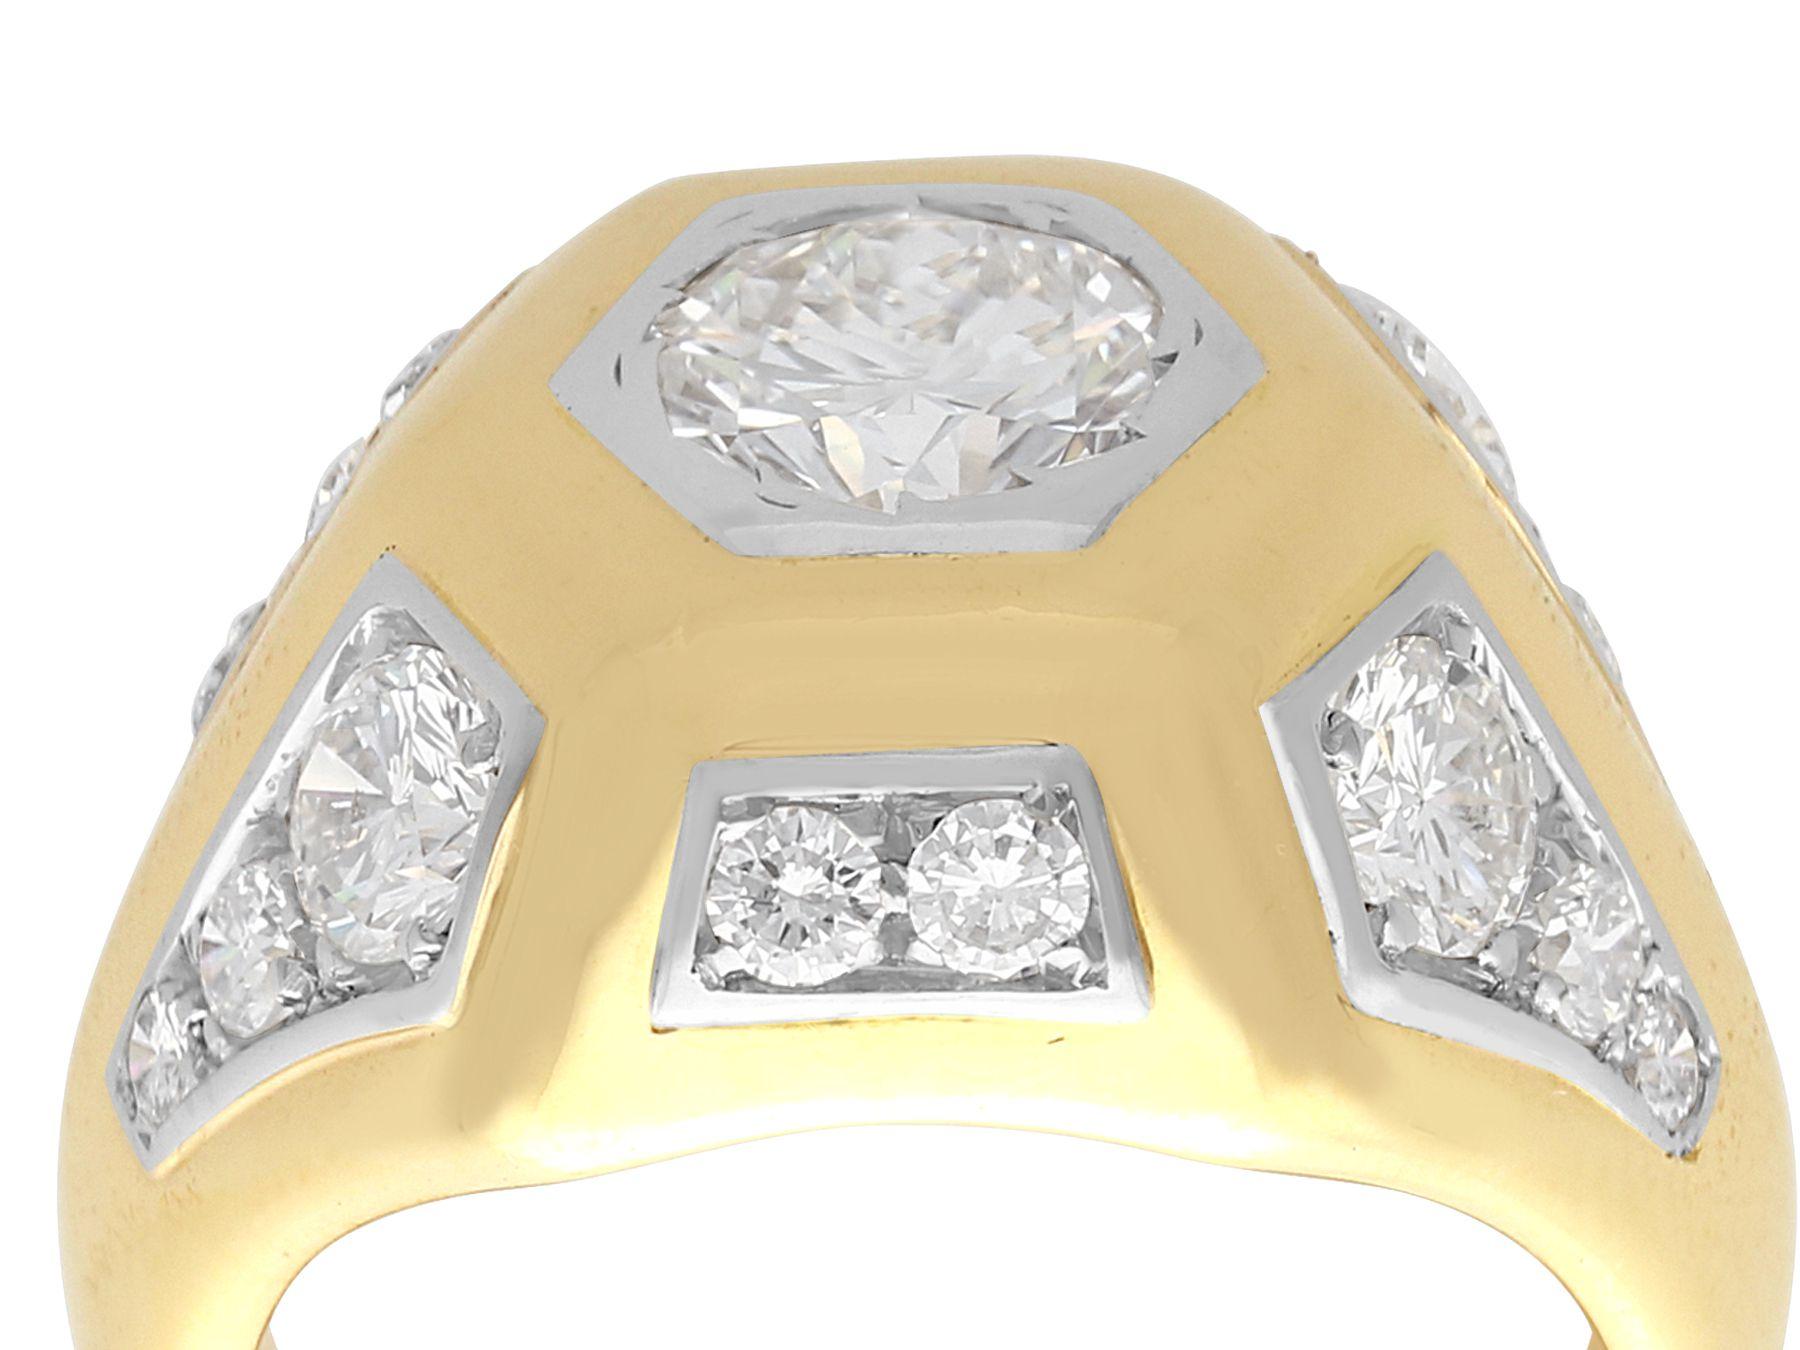 A stunning, fine and impressive vintage French 2.70 carat diamond and 18 karat yellow gold, 18 karat white gold set gent's dress ring; part of our diverse vintage jewelry collections

This stunning fine and impressive vintage ring has been crafted